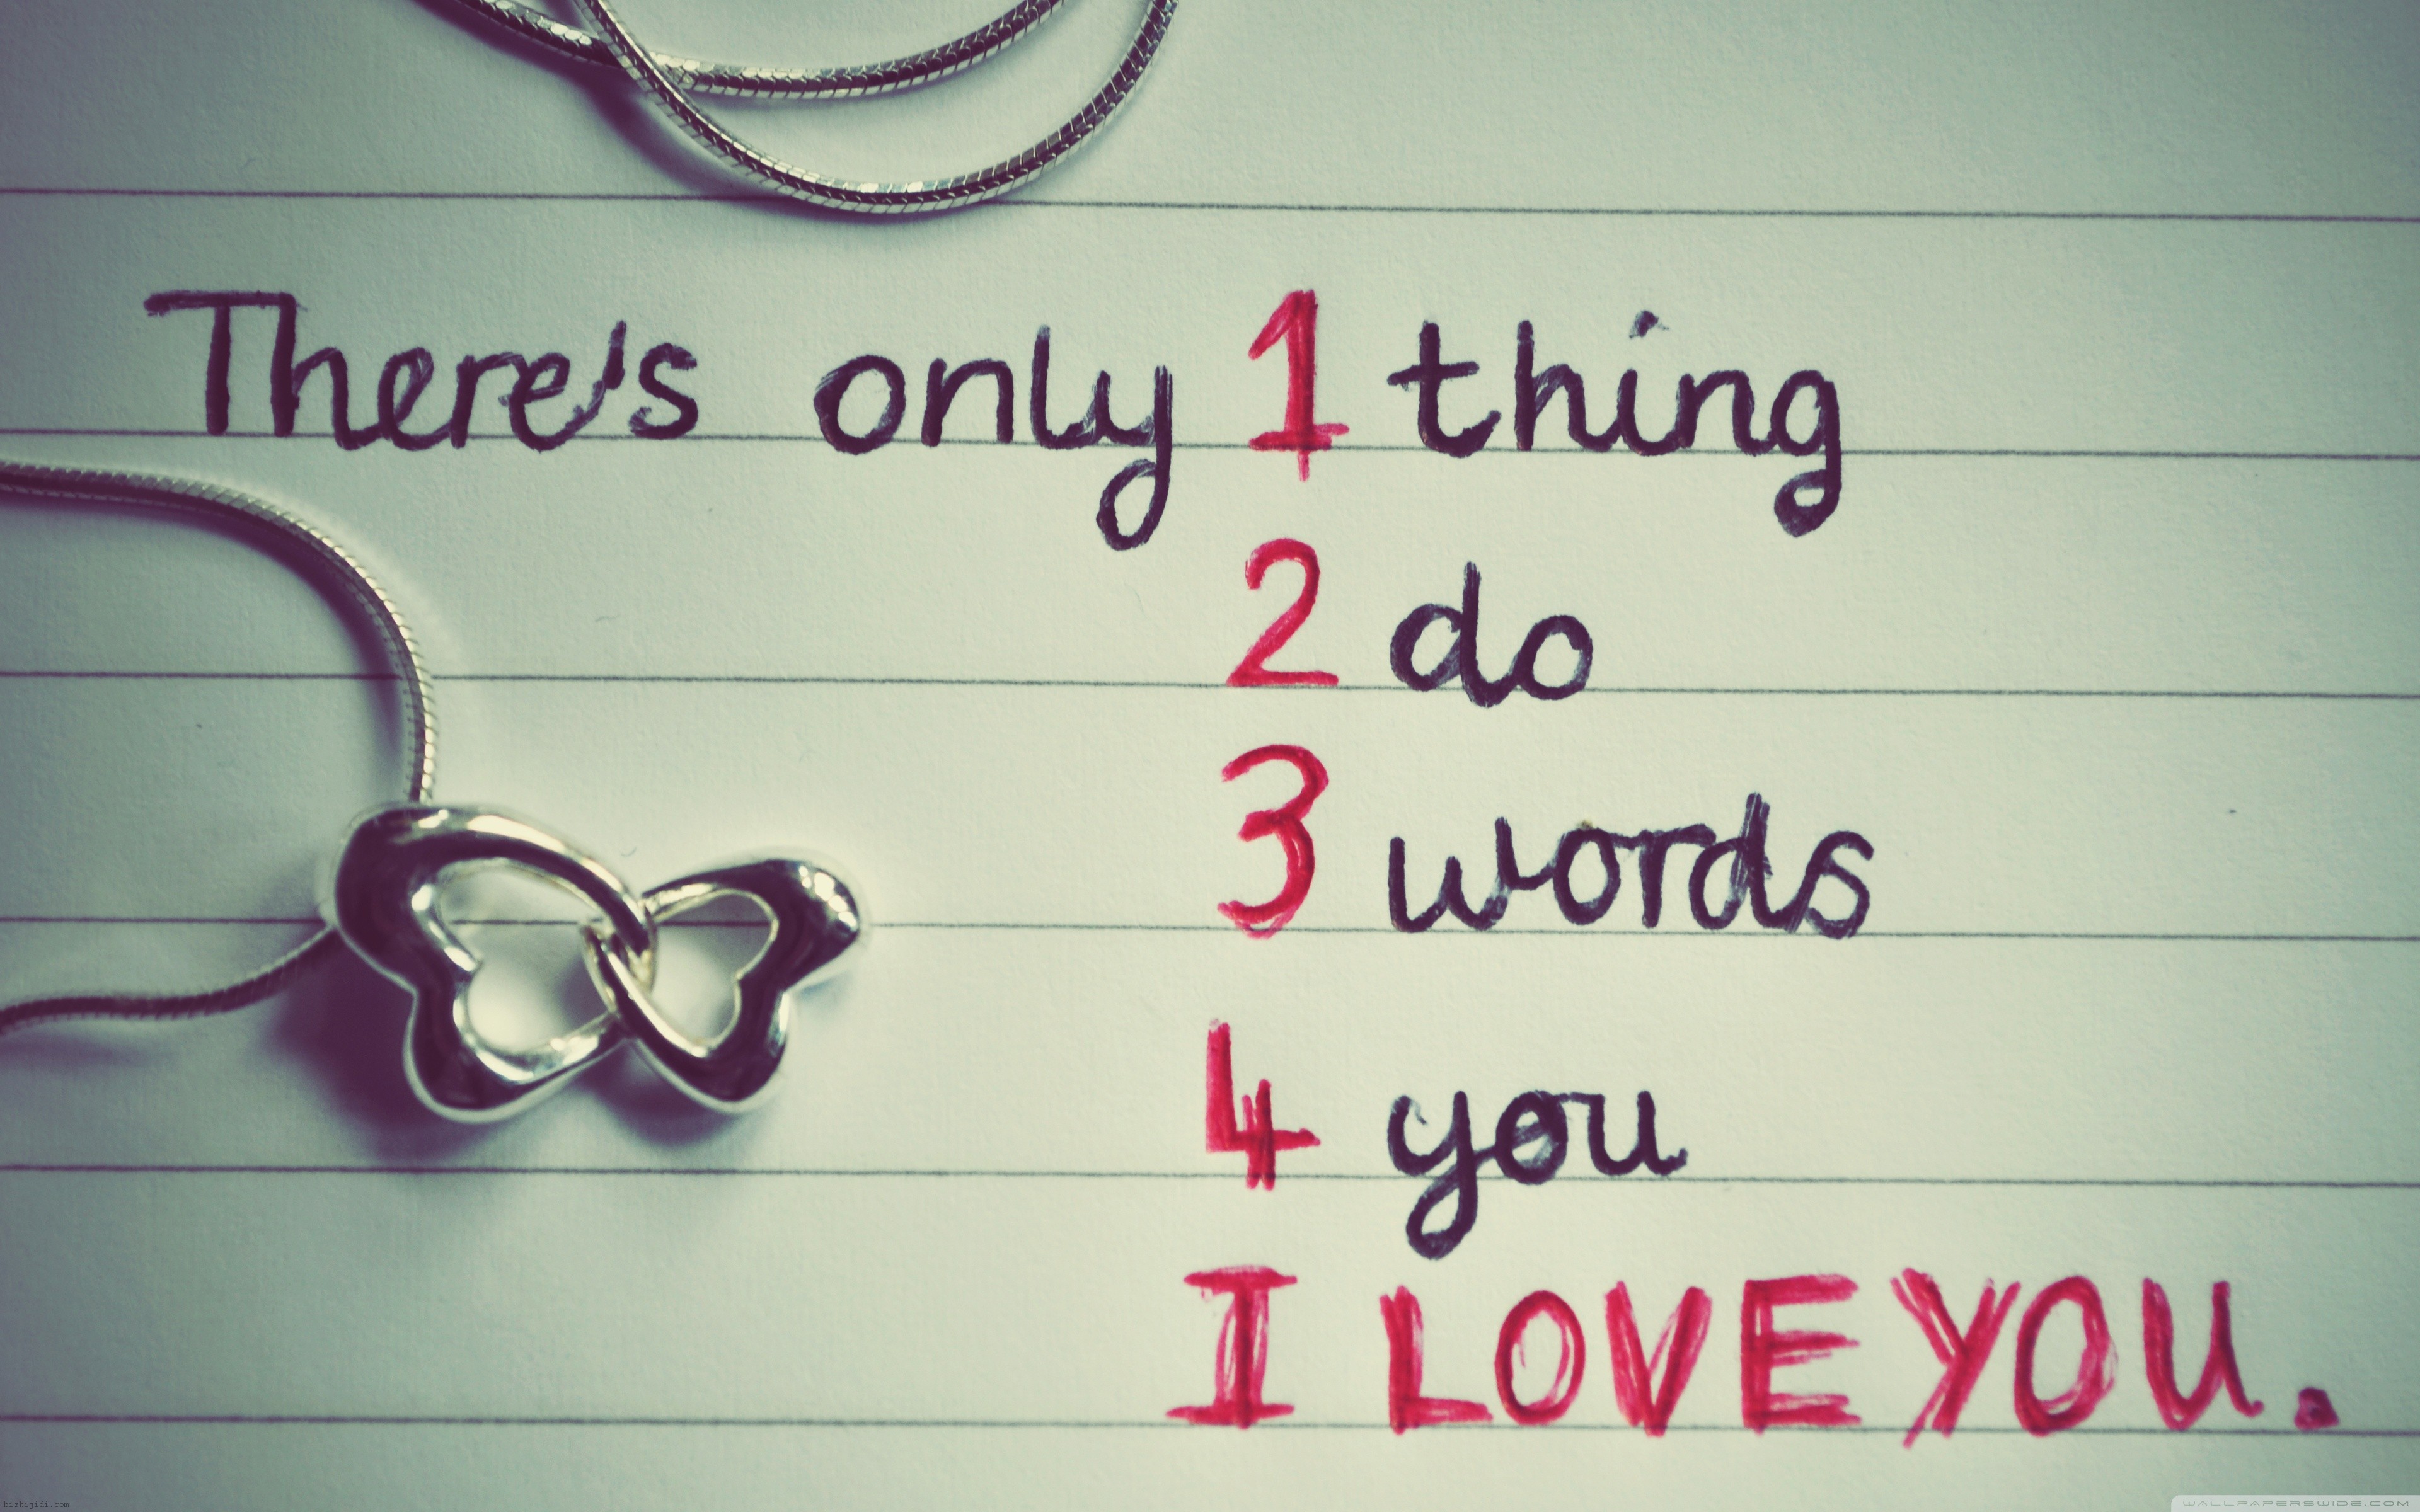 abstract-text-necklaces-hearts-love-quotes-i-love-you-1-thing-2-do-3 ...